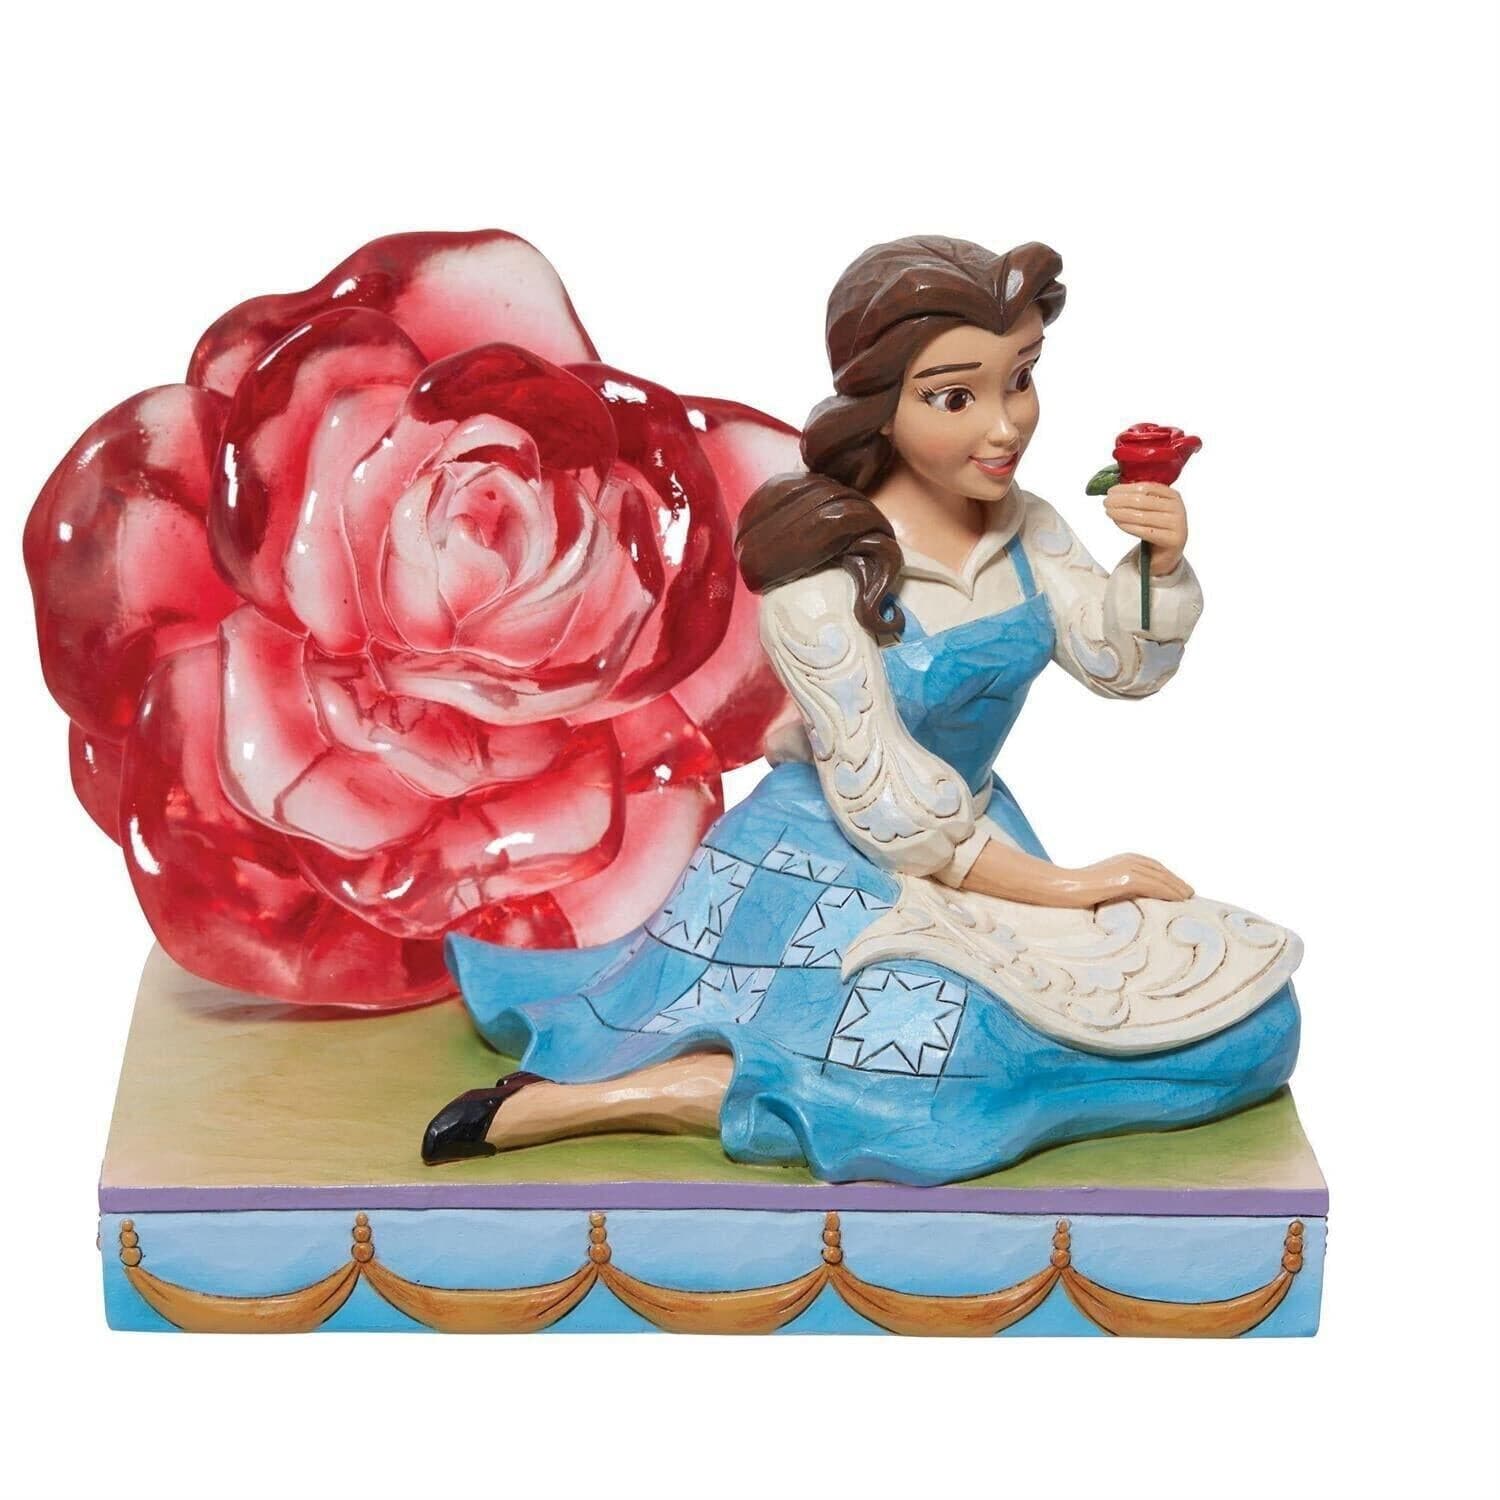 Enesco Disney Ornament Disney Traditions Figurine - An Enchanted Rose - Belle with Clear Resin Rose